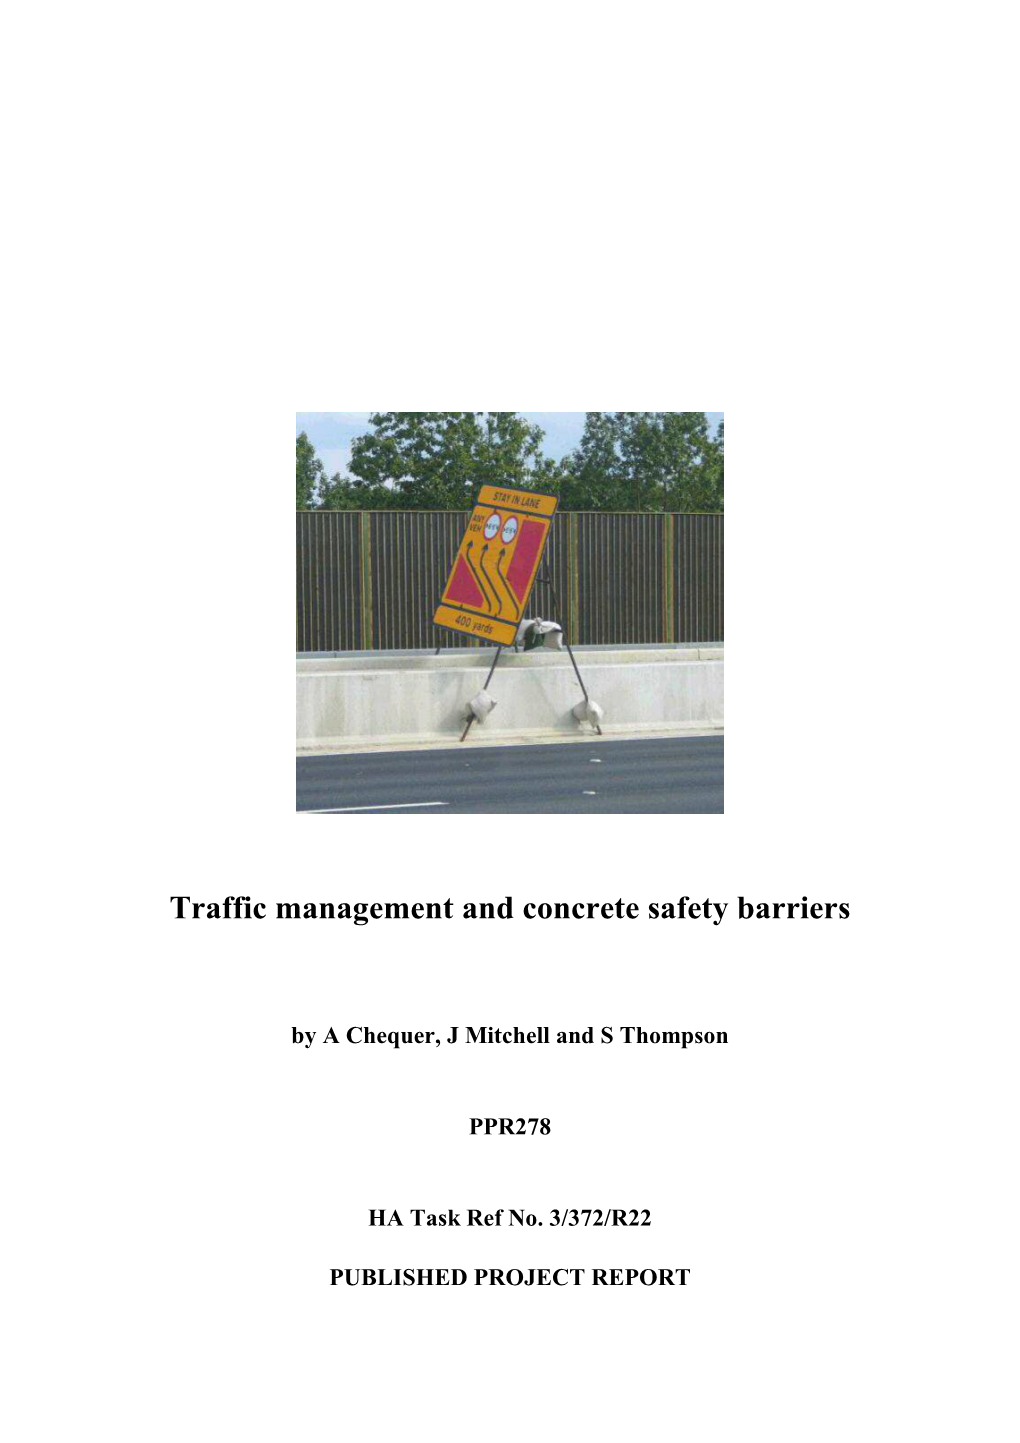 Traffic Management and Concrete Safety Barriers